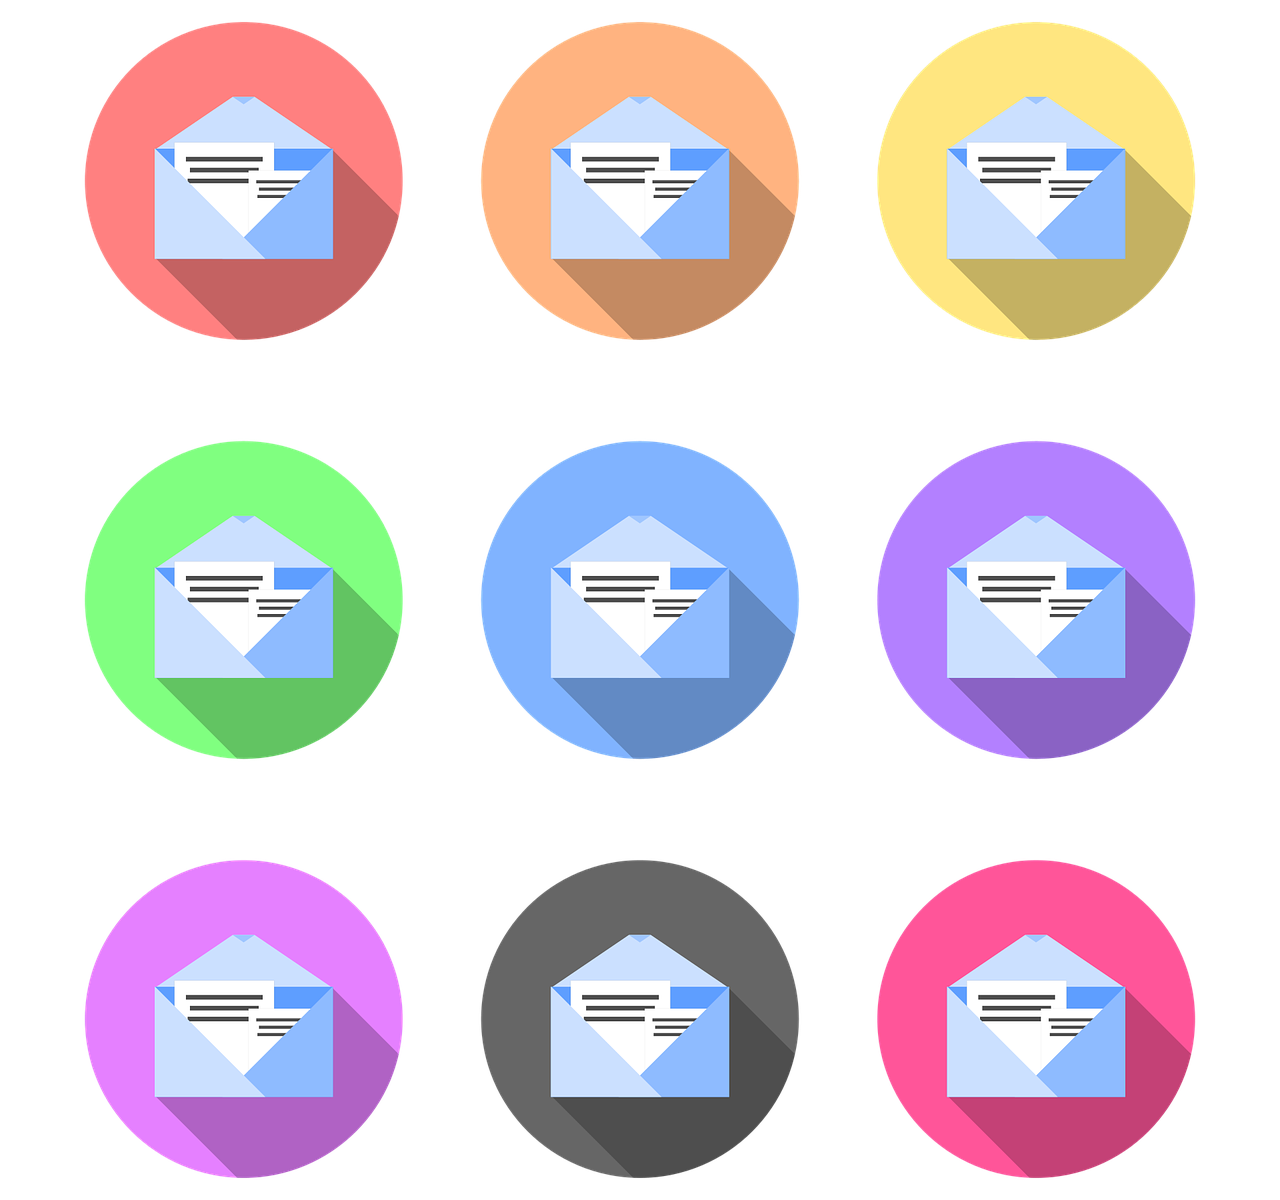 Nine envelopes with each in a different color circle